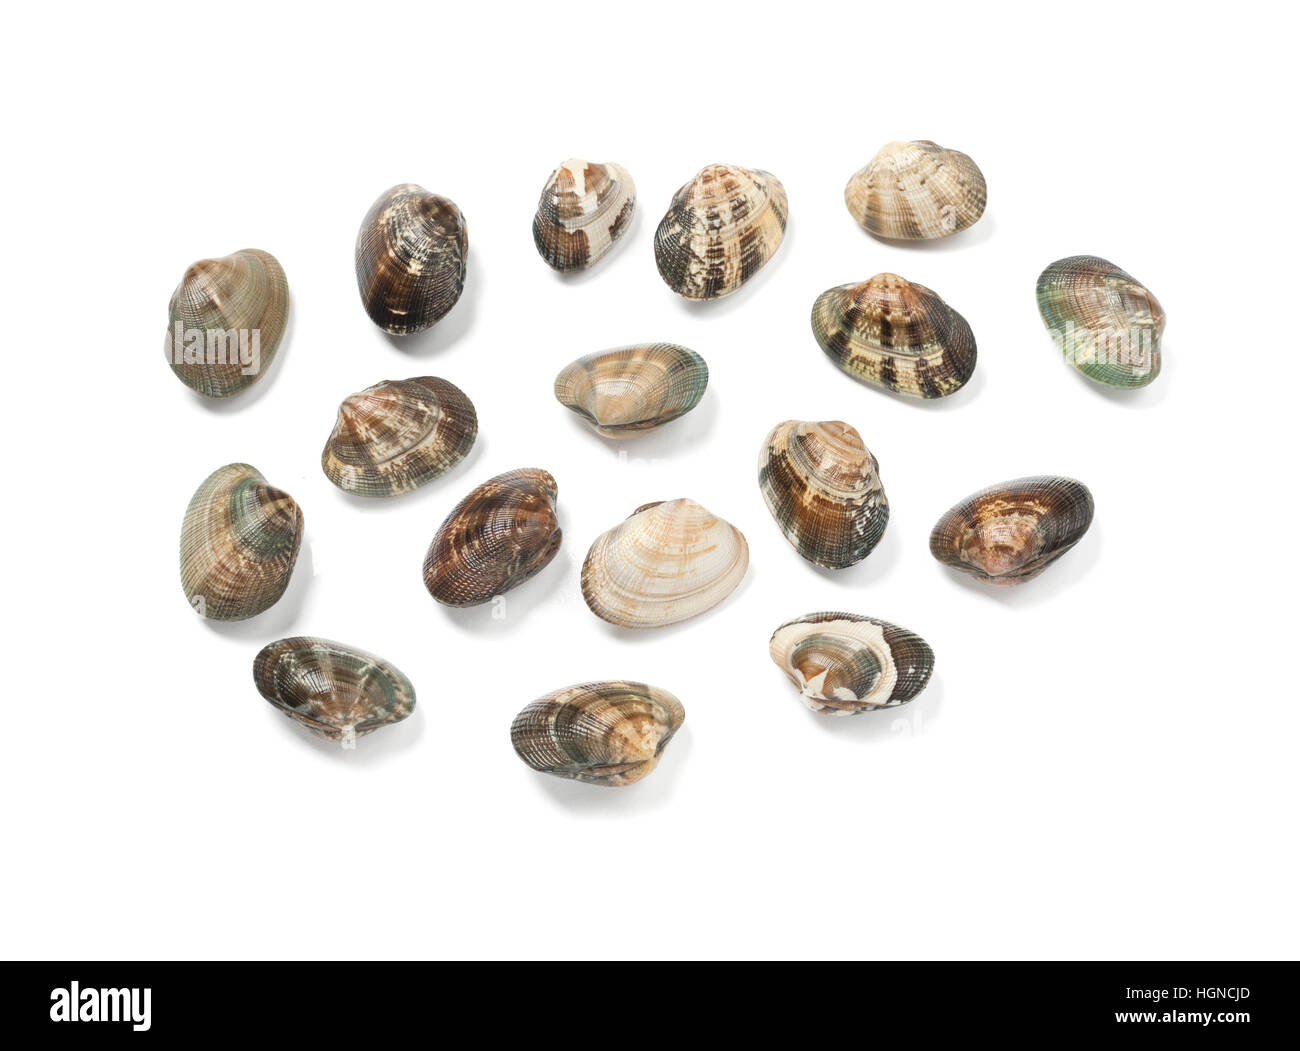 Clams against white background Stock Photo